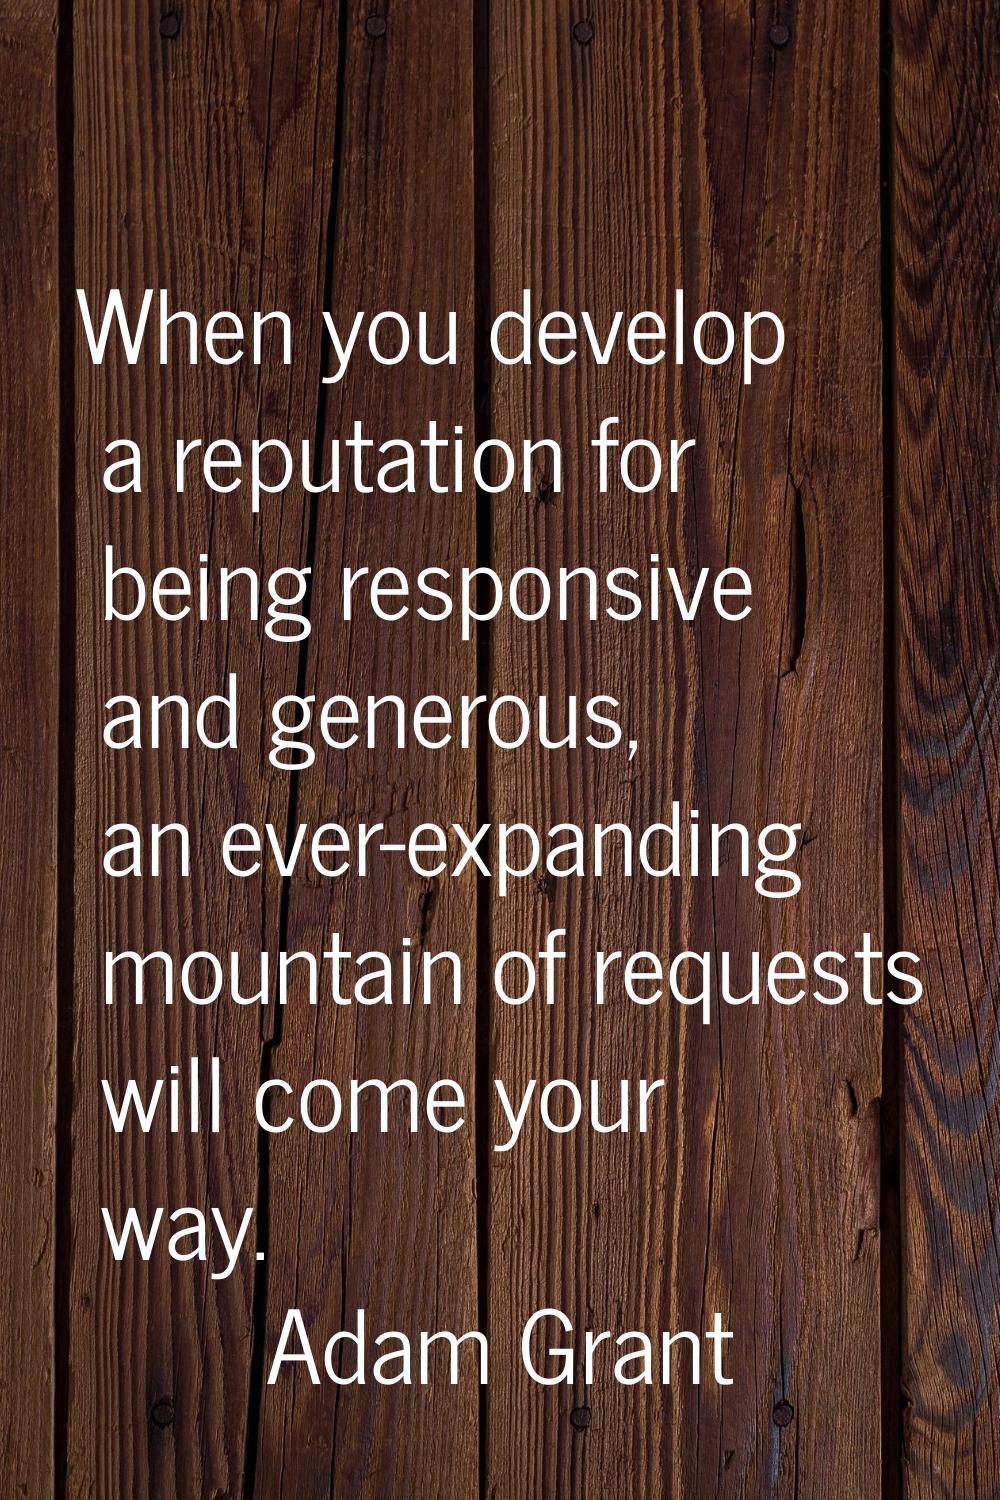 When you develop a reputation for being responsive and generous, an ever-expanding mountain of requ